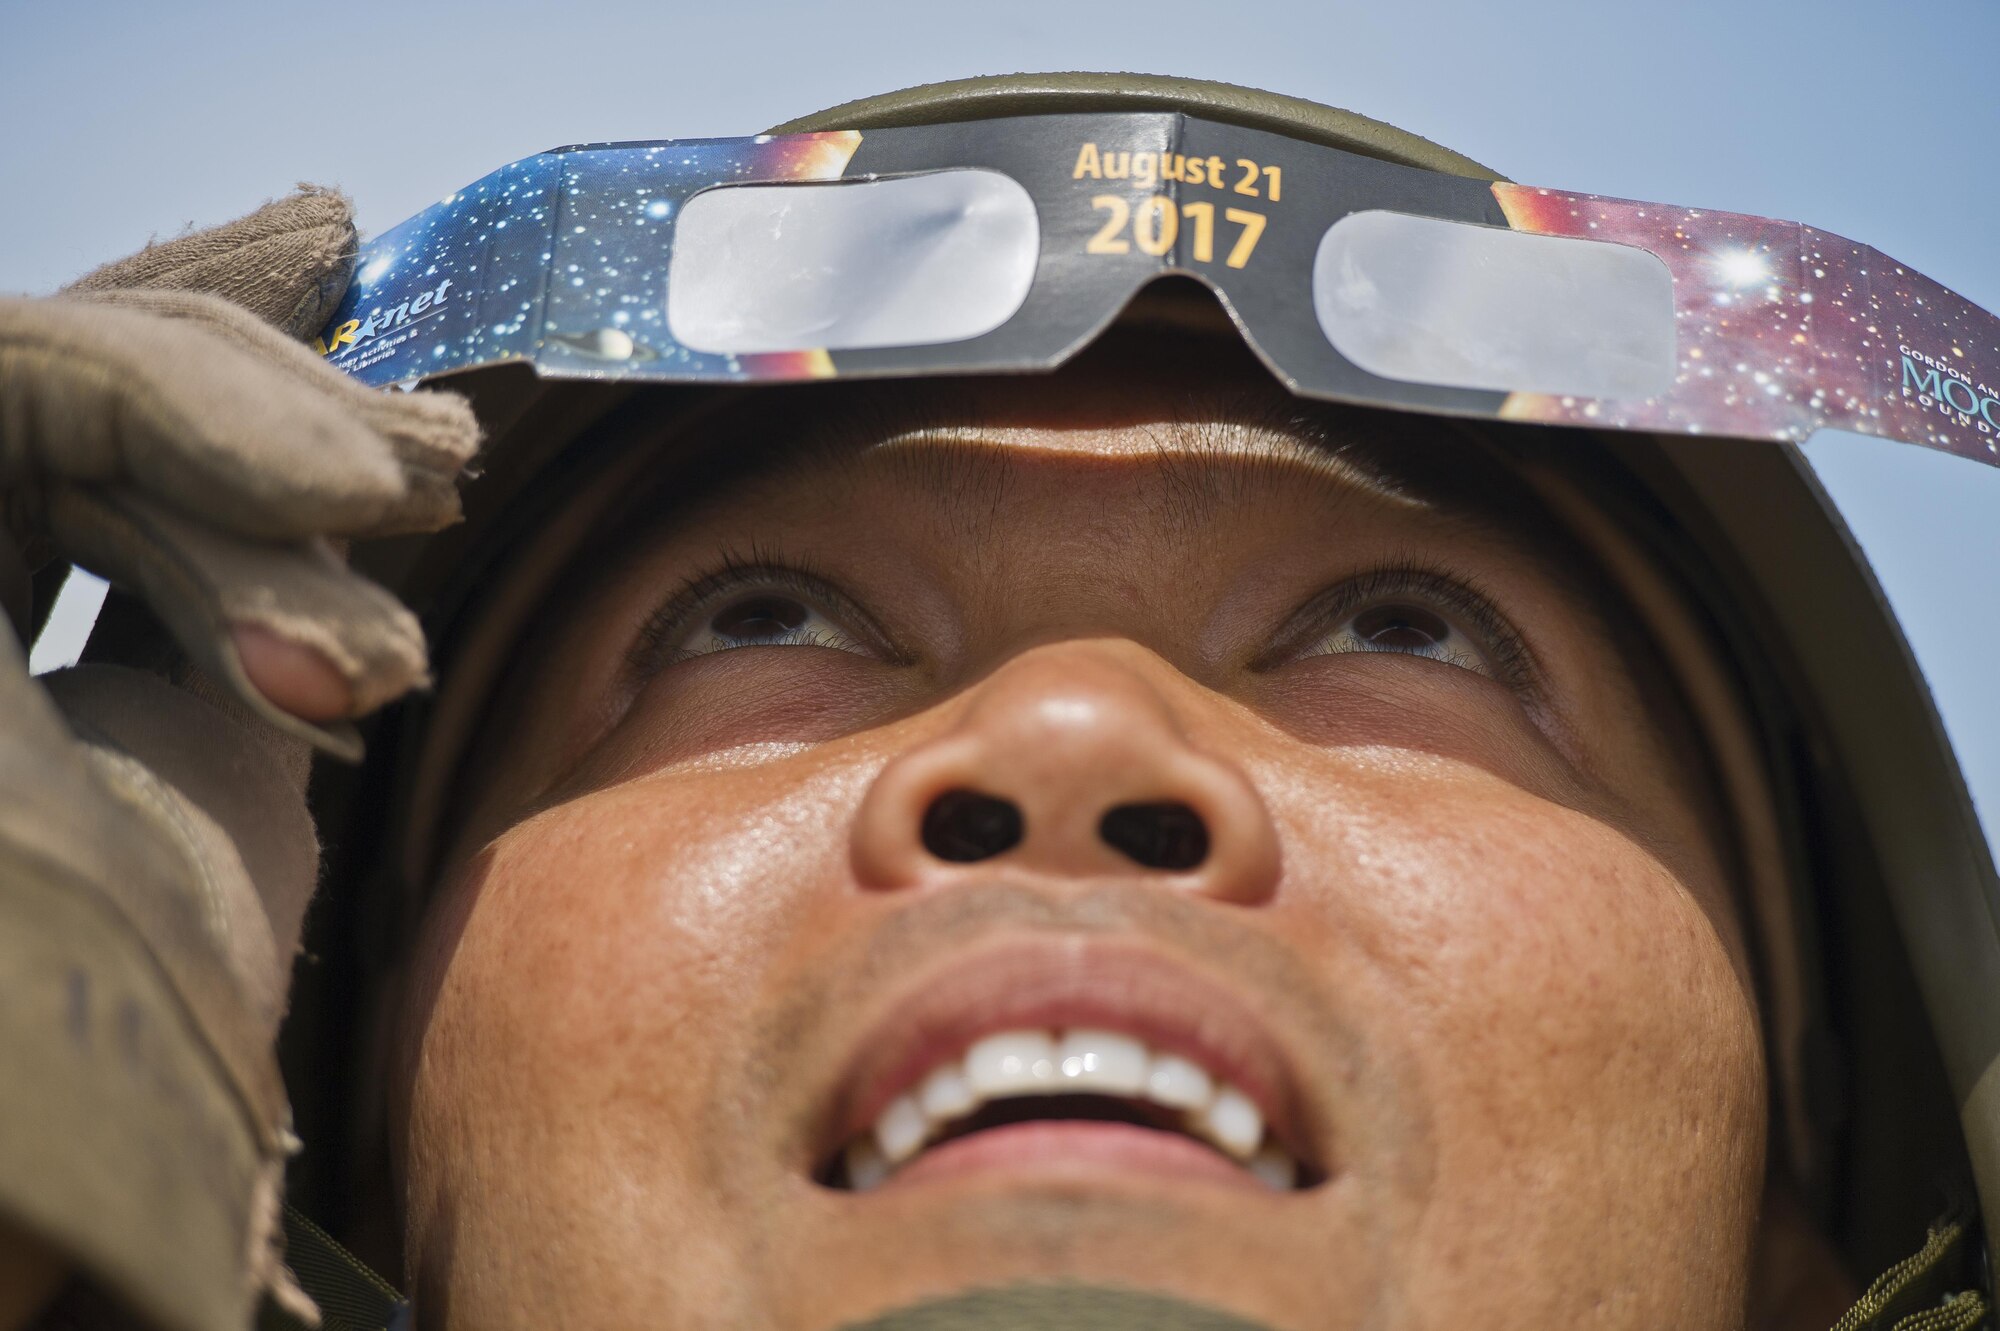 Capt. Vincent Alipio, assigned to the 349th Medical Squadron, Travis AFB, Calif., observes through his eclipse glasses as the moon passes in front of the sun during a total solar eclipse at Young Air Assault Strip, Fort McCoy, Wis., Aug. 21, 2017, while participating in exercise Patriot Warrior.